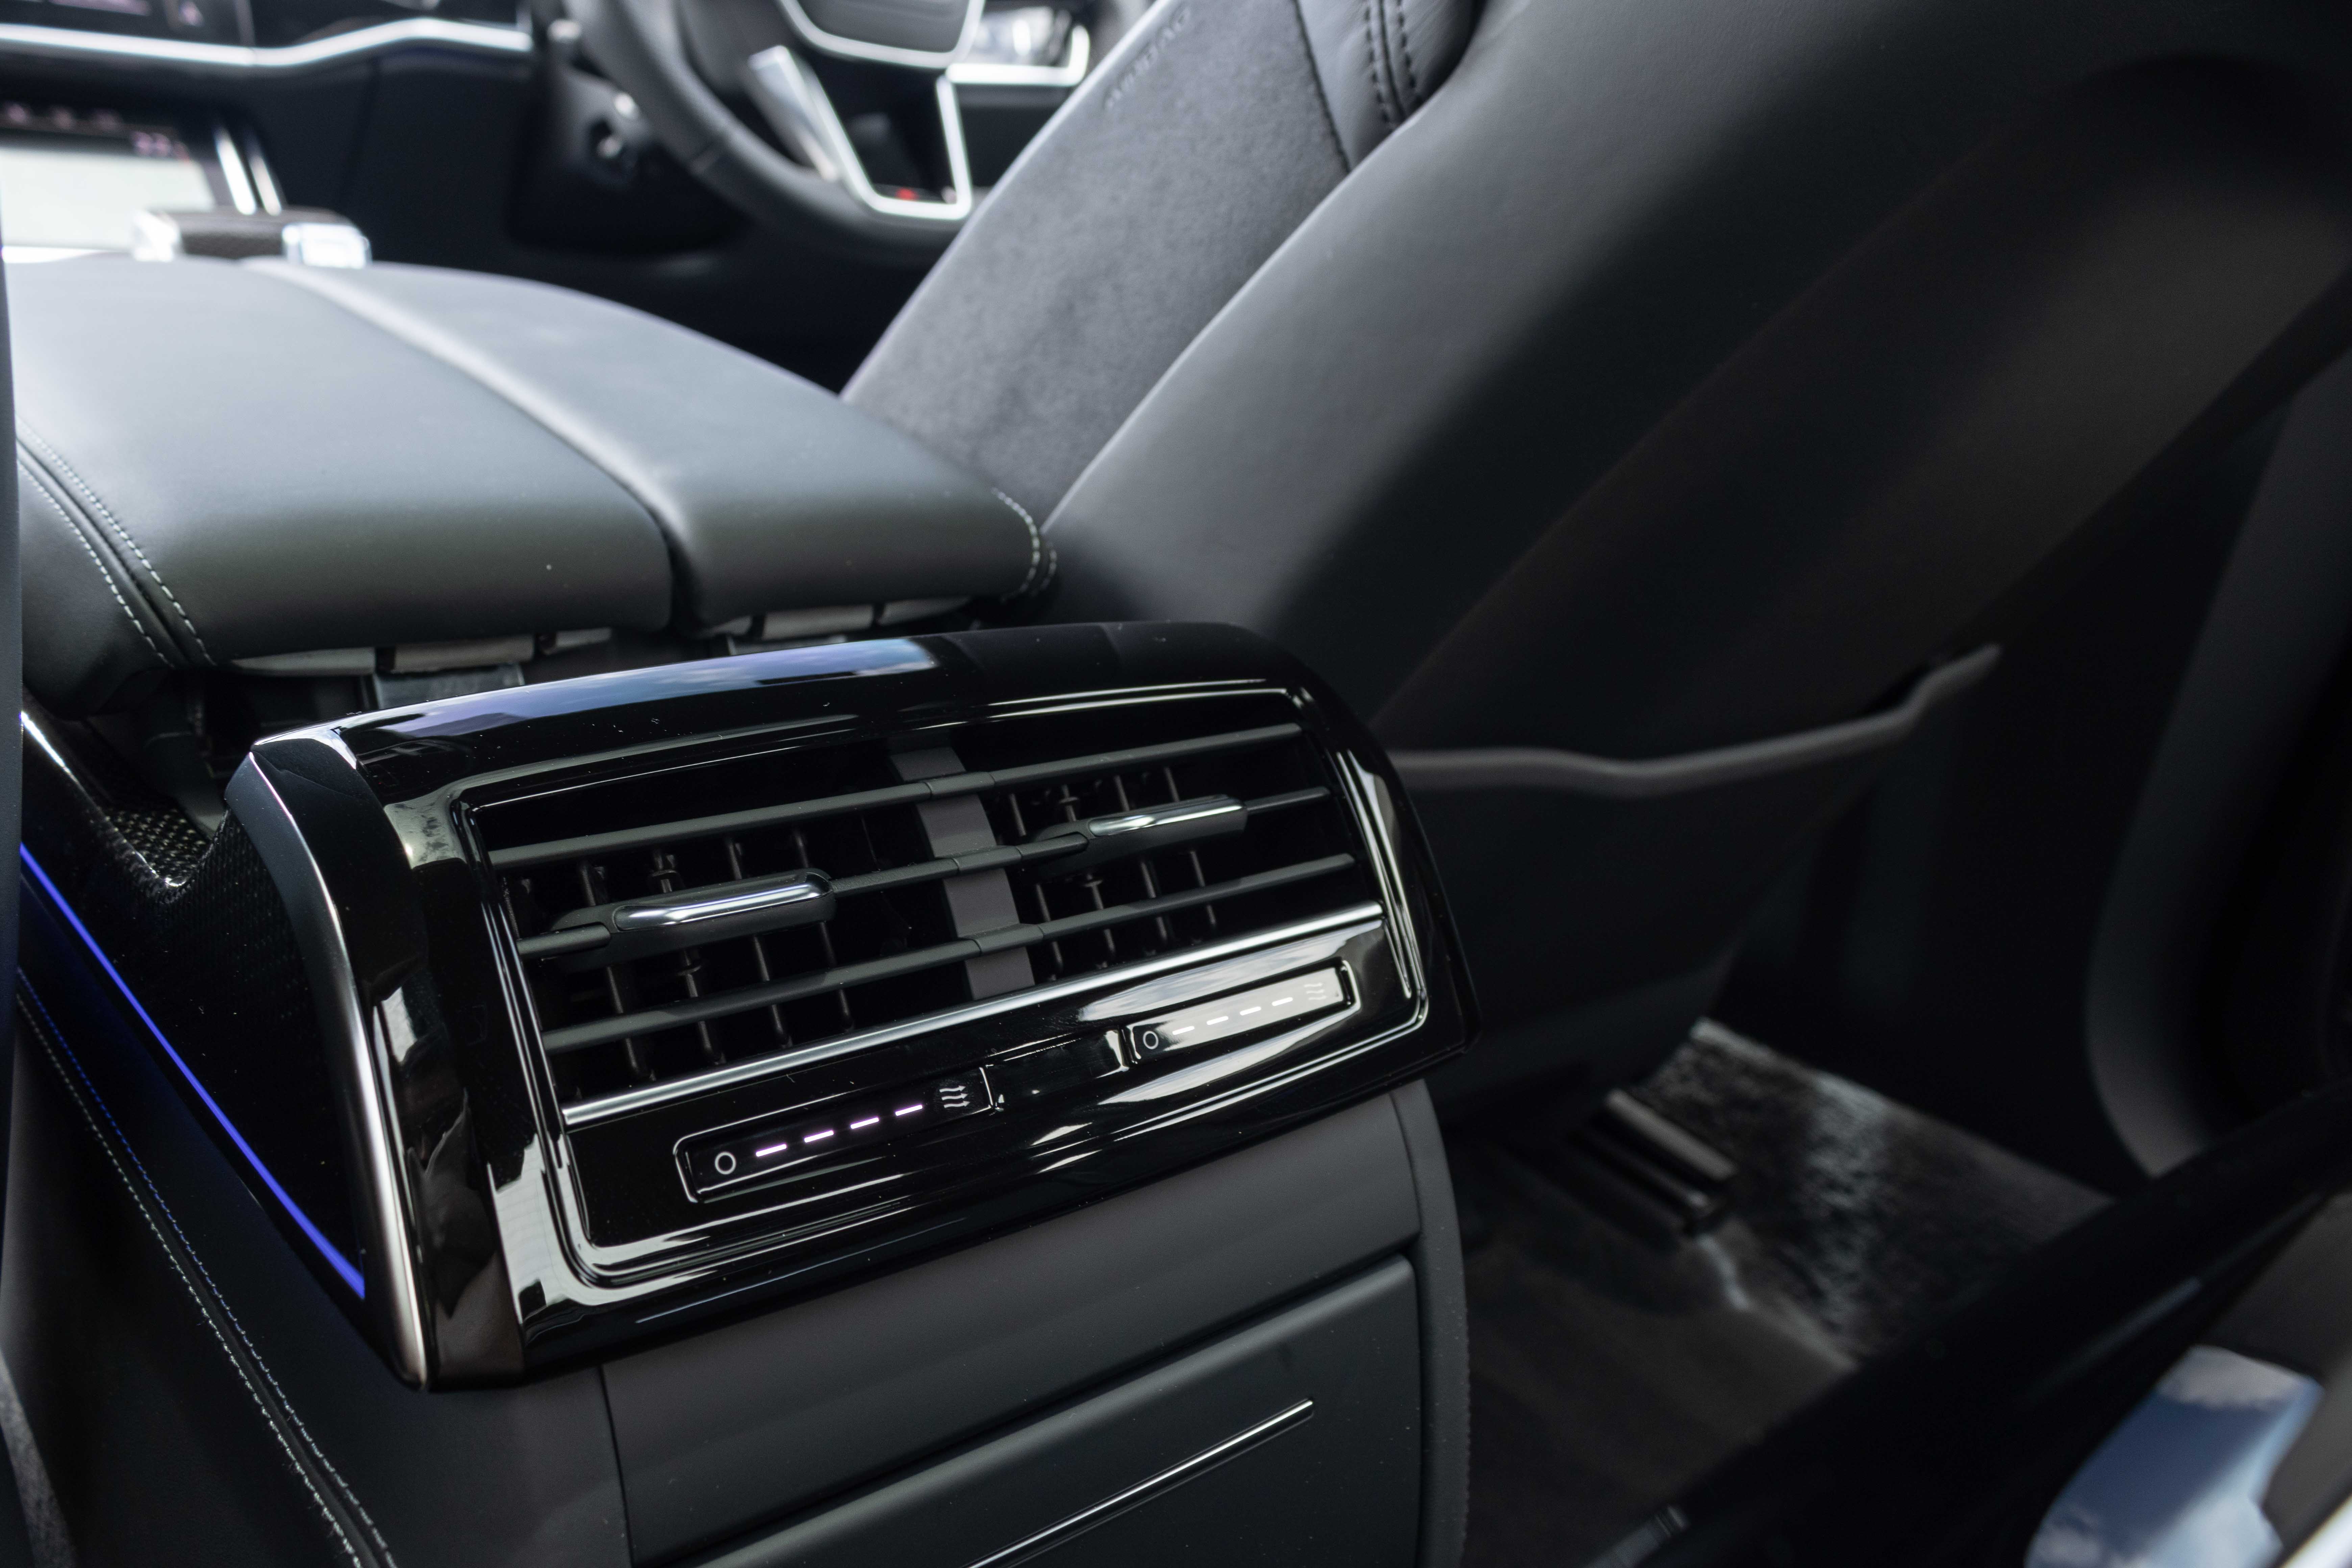 Audi S8 Singapore - Rear air-conditioning vents